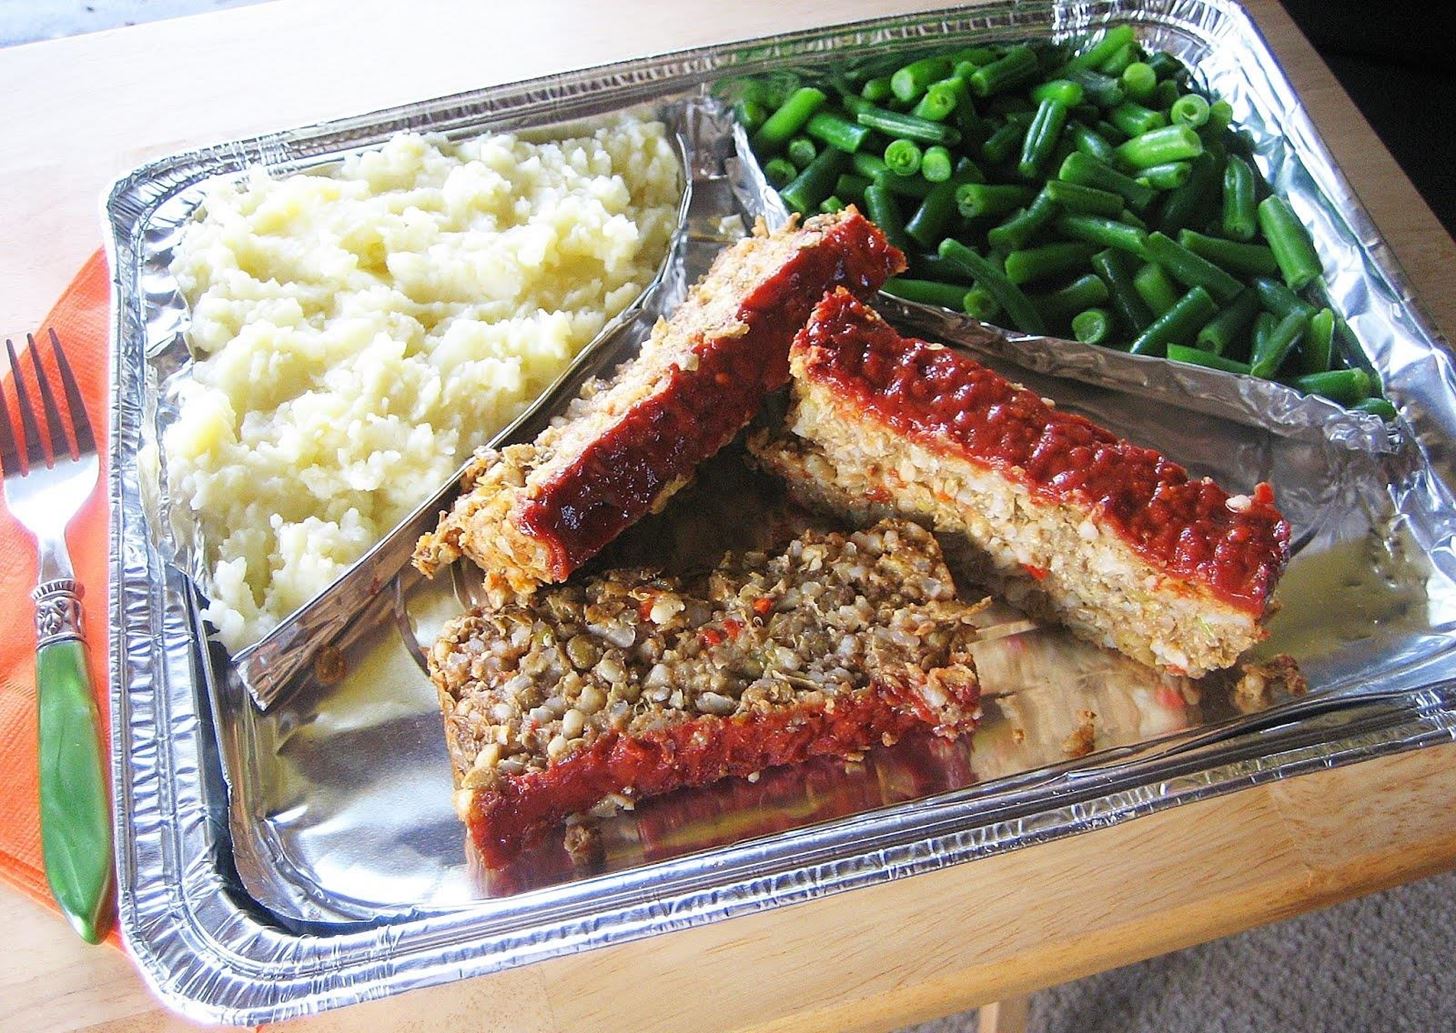 No Preservatives, Please: How to Make Frozen TV Dinners